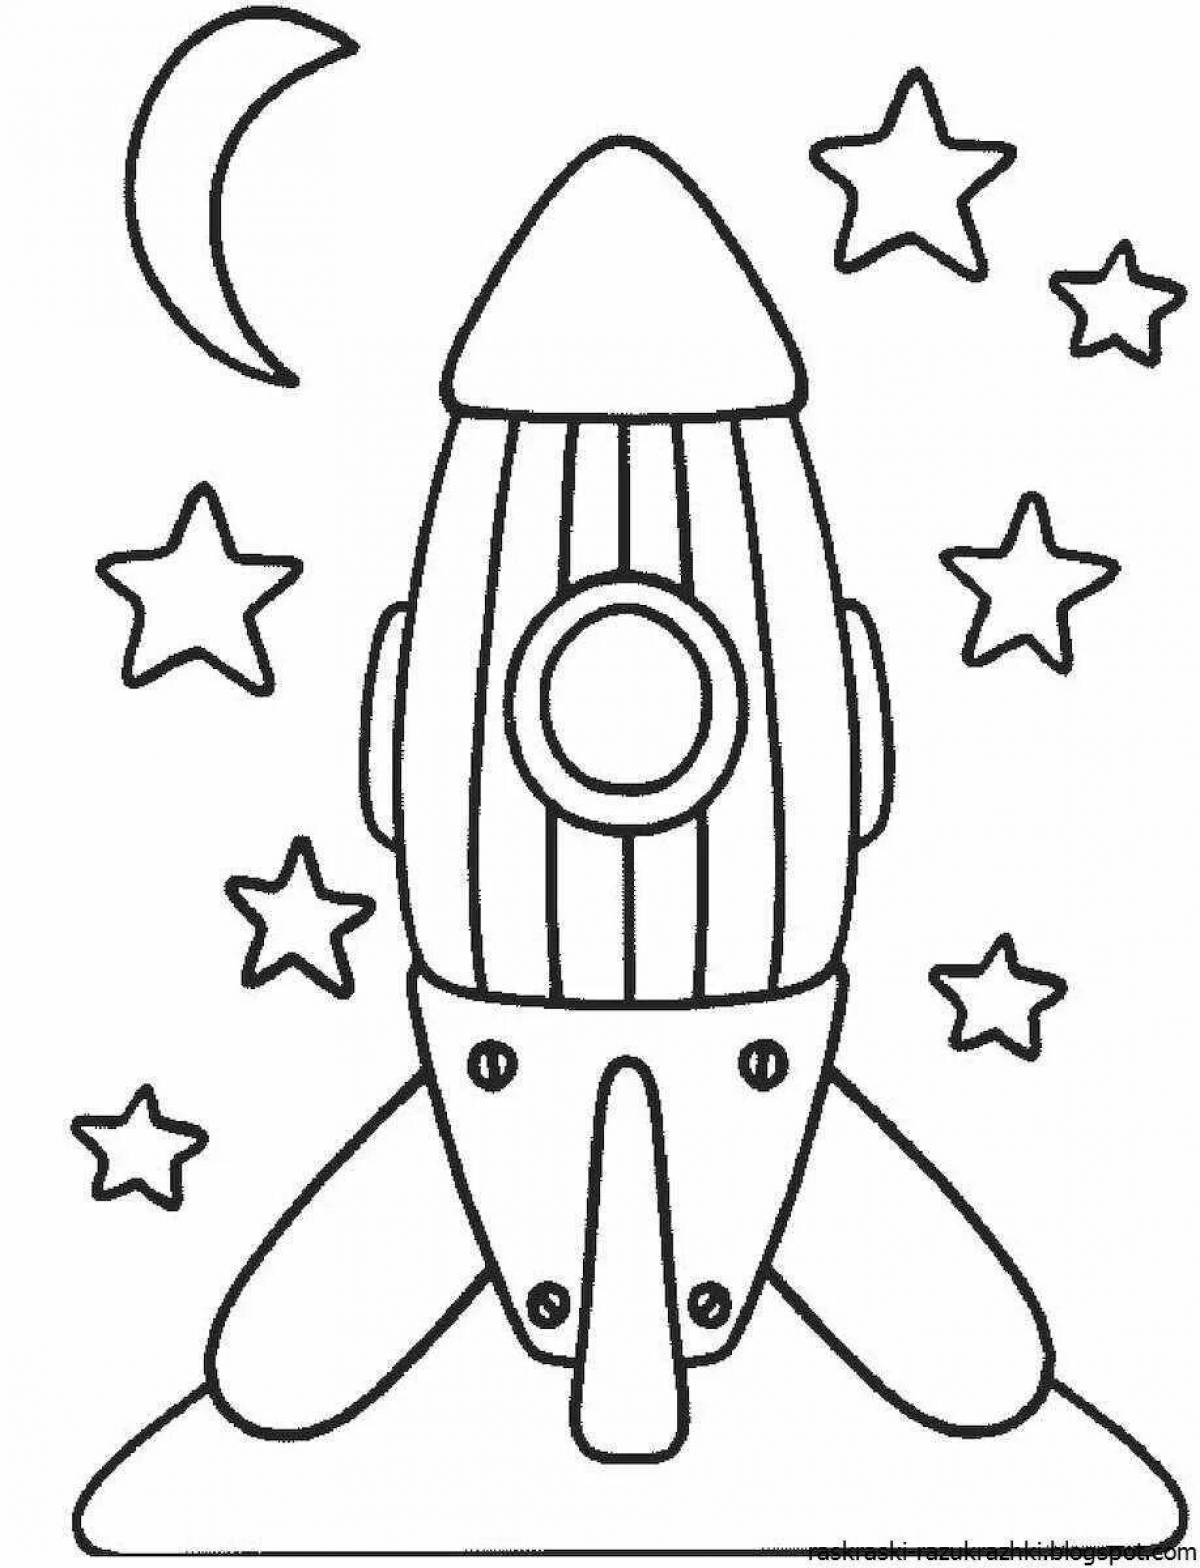 Flickering rocket coloring book for 4-5 year olds